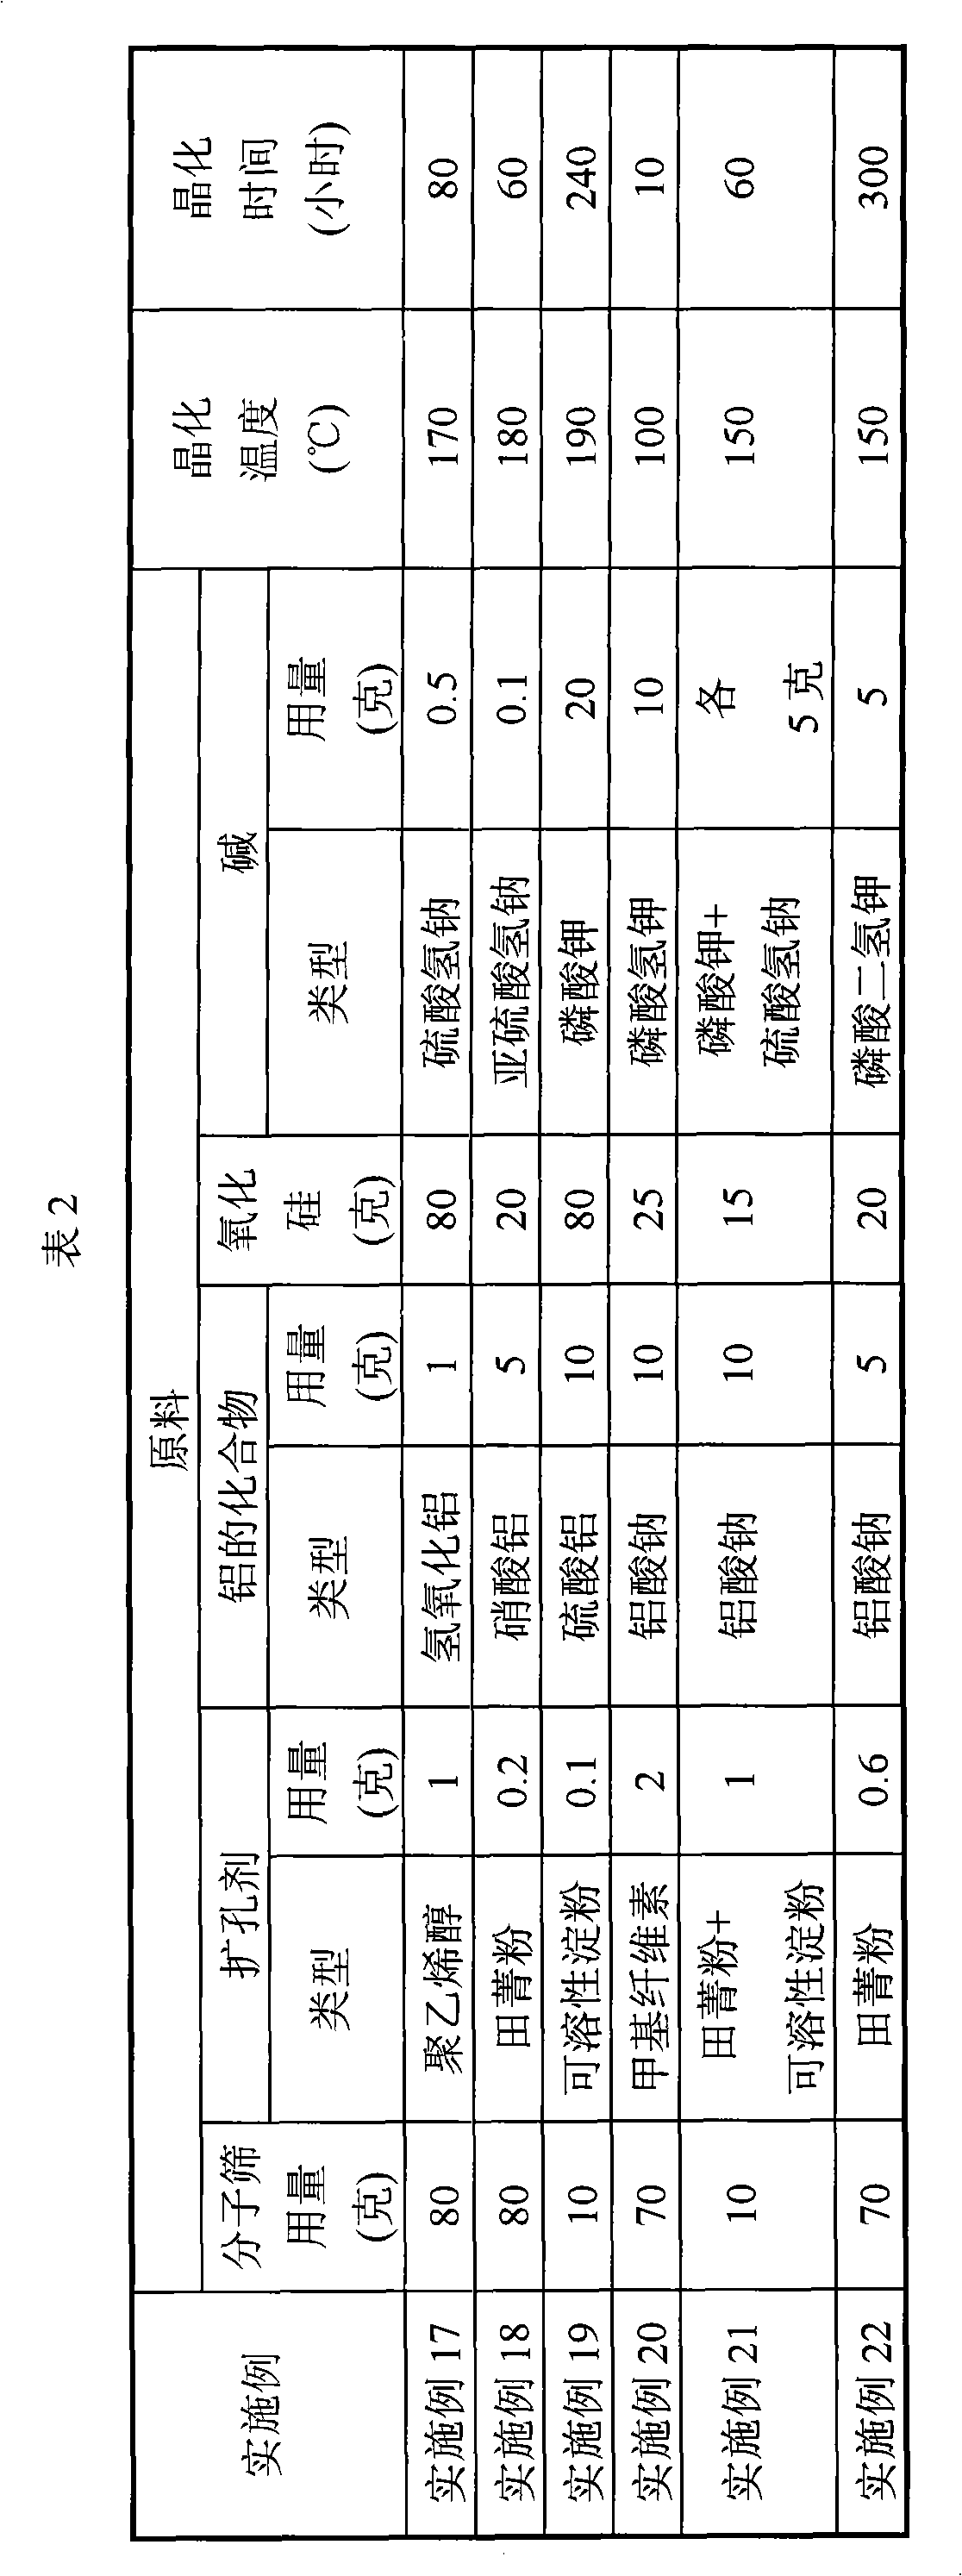 Method for preparing light olefin by dehydrating oxygen compound